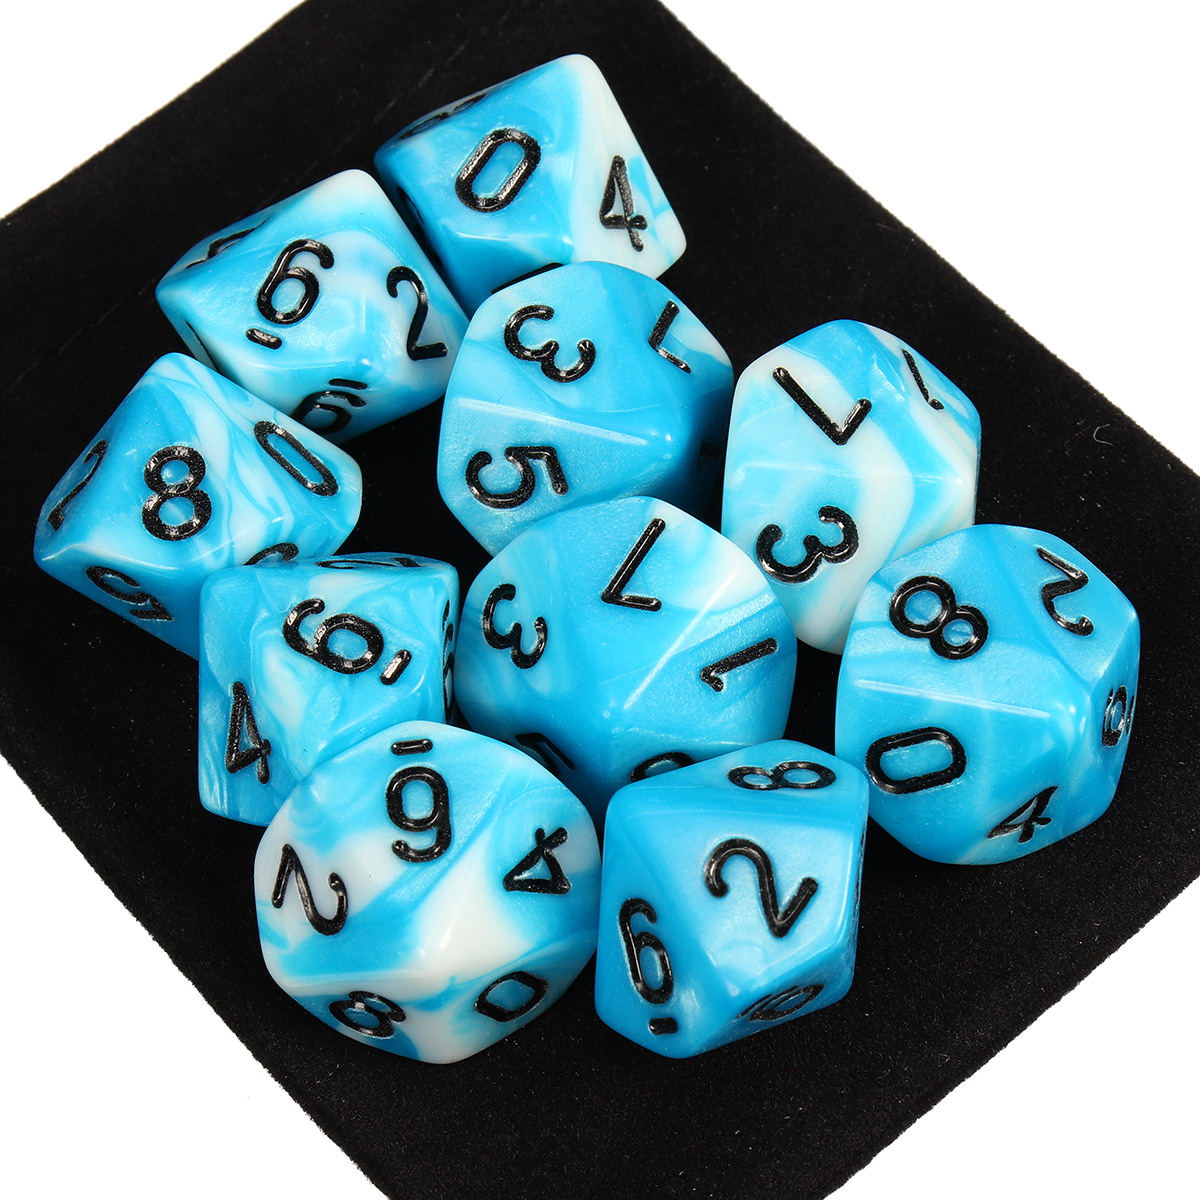 10pcs-10-Sided-Dice-D10-Polyhedral-Dice-RPG-Role-Playing-Game-Dices-w-bag-1351752-4